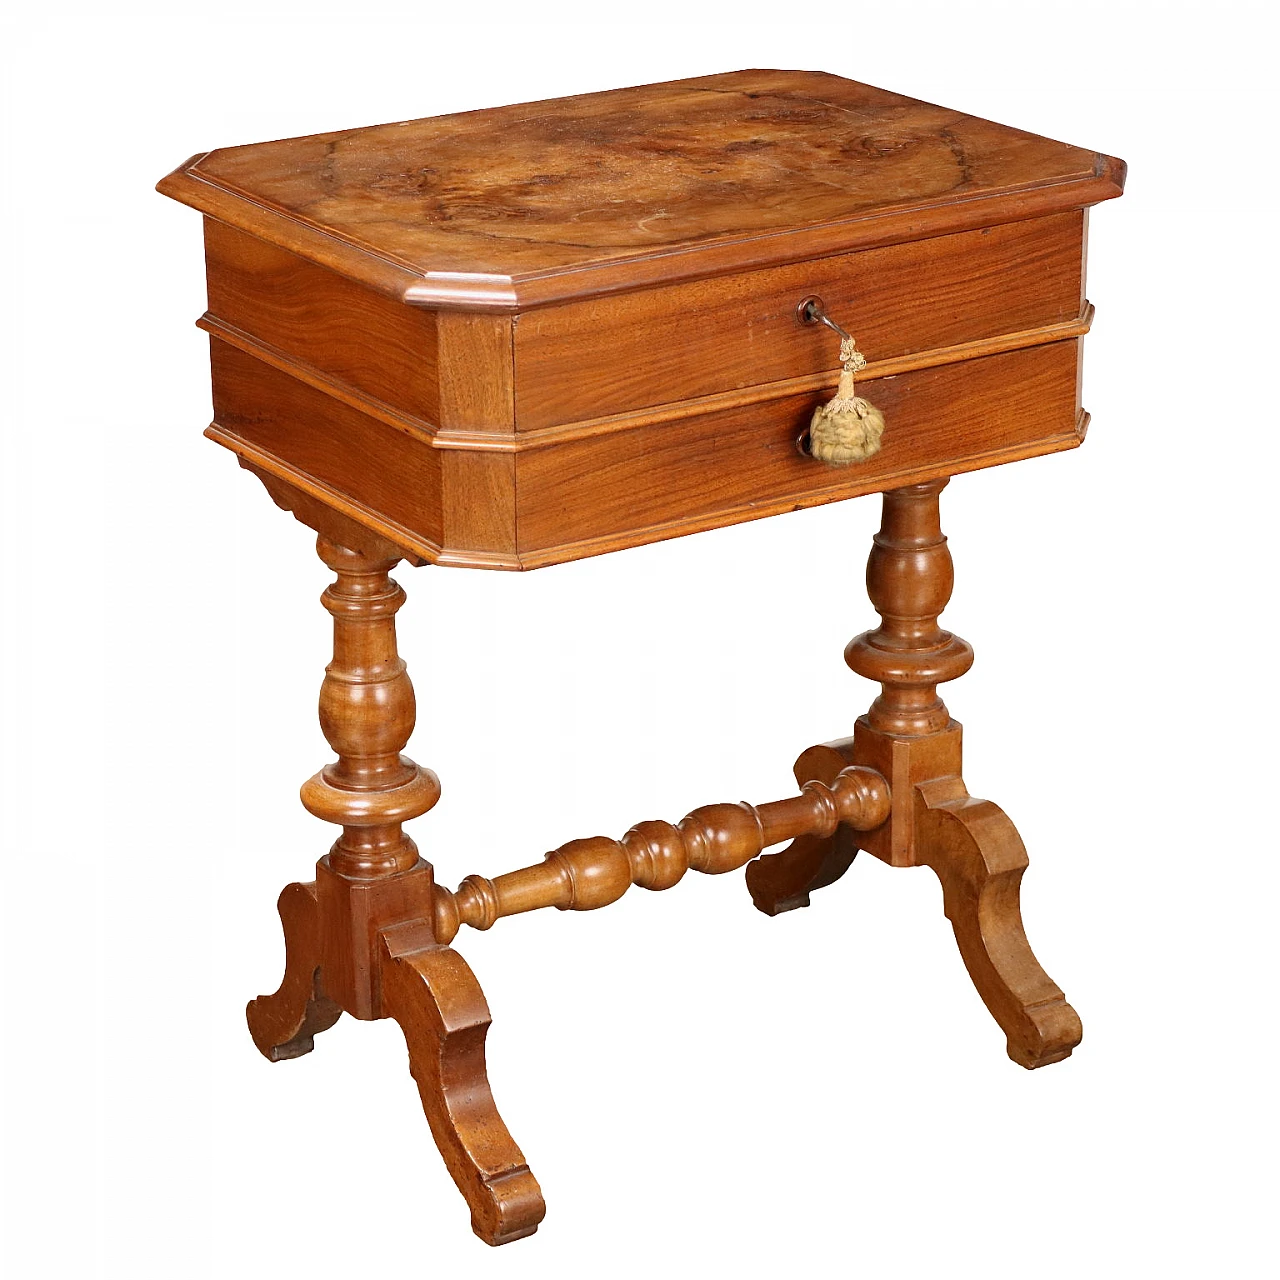 Walnut and cherry wood side table with drawers, 19th century 1